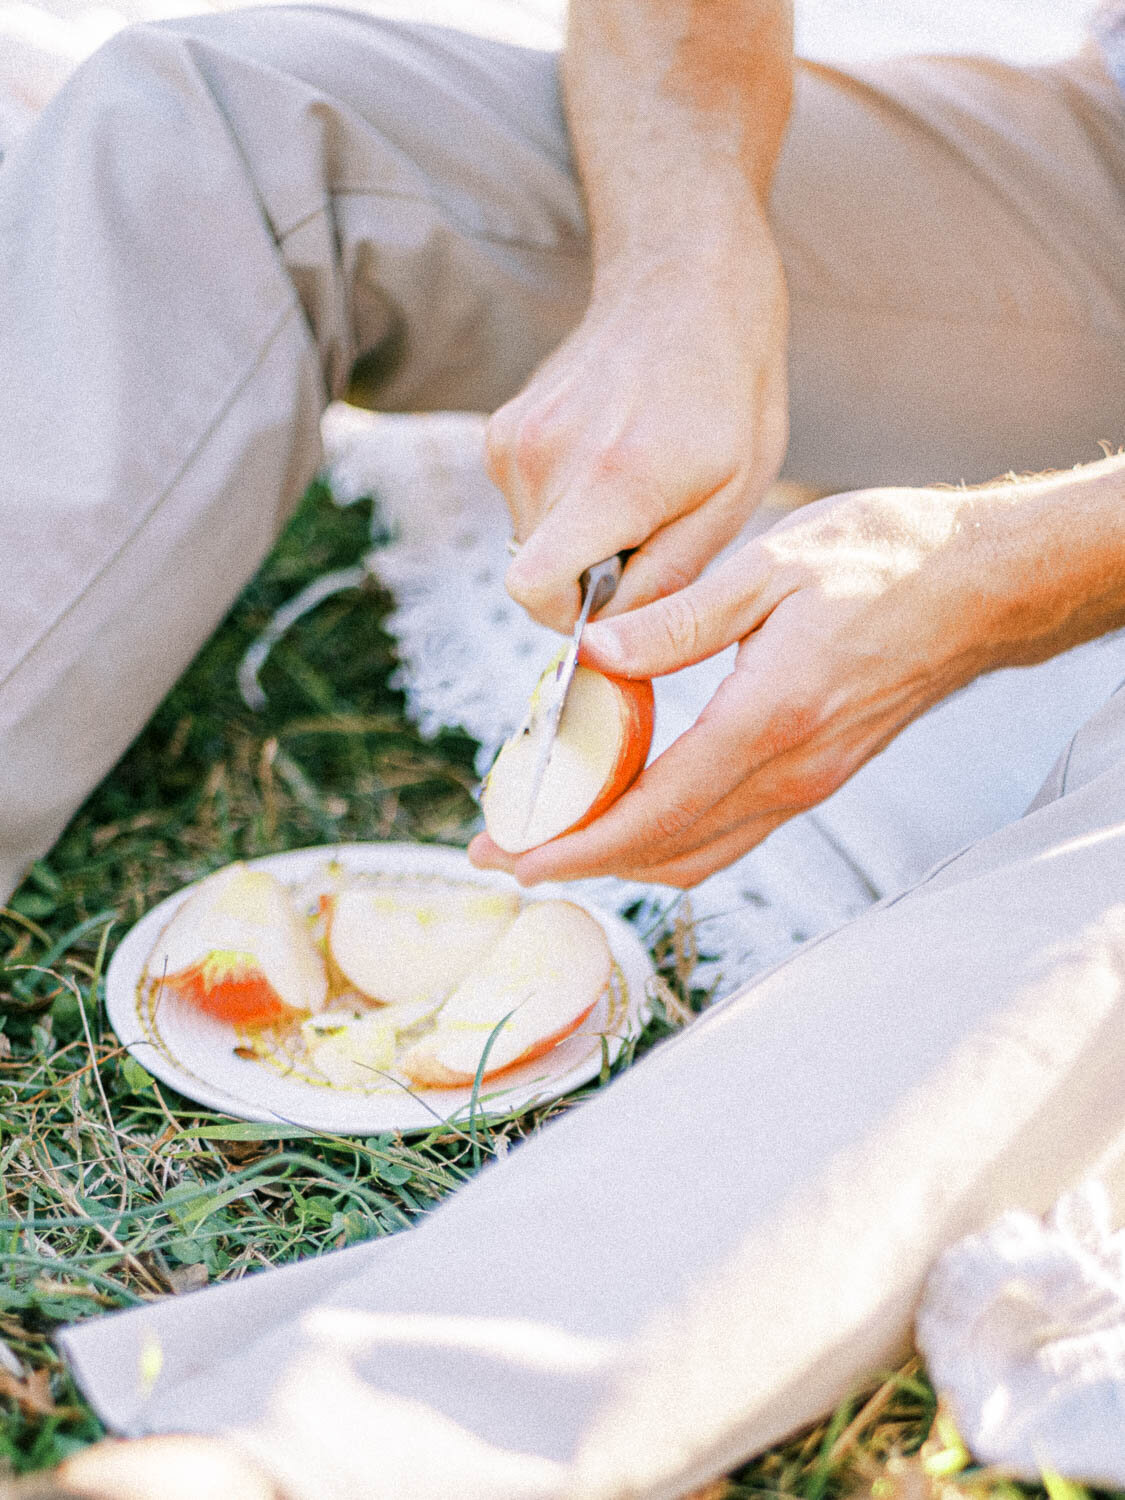 upclose-man-cutting-apple-slice-at-picnic-engagement-session-in-charlottesville-virginia.jpg